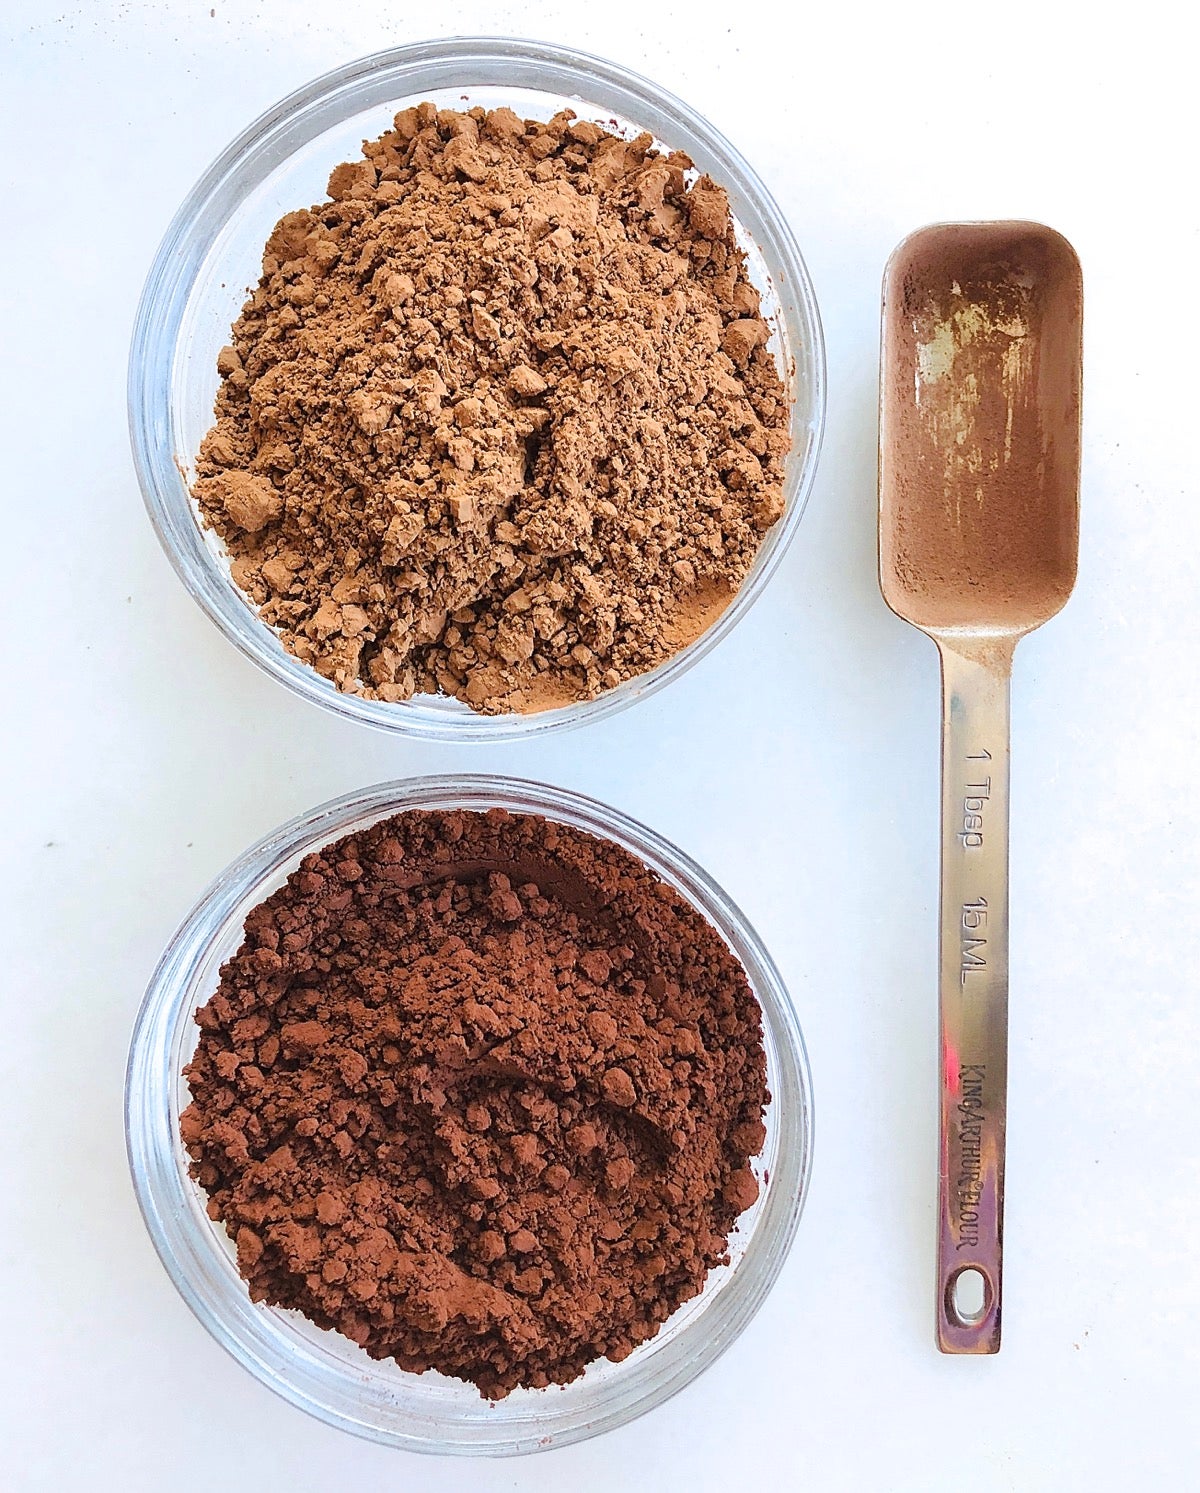 Natural cocoa and Dutch-process cocoa in small bowls showing color difference.